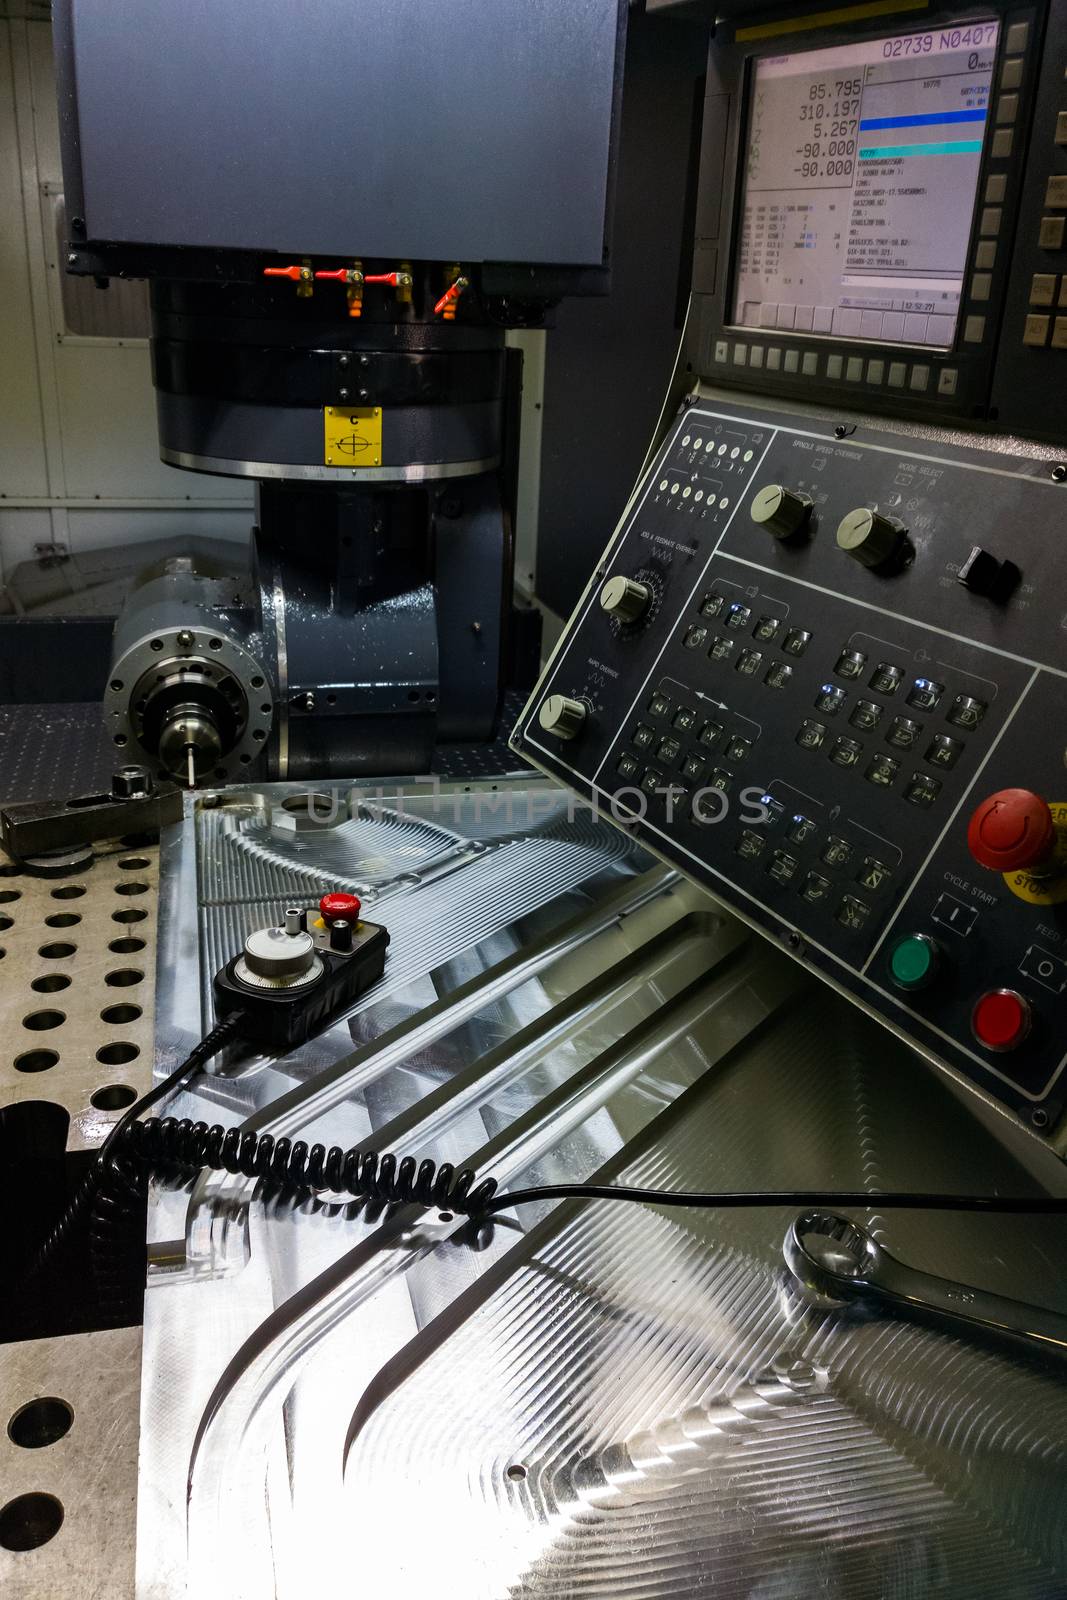 Measuring process with ruby touch probe on large CNC milling machine in jog mode.